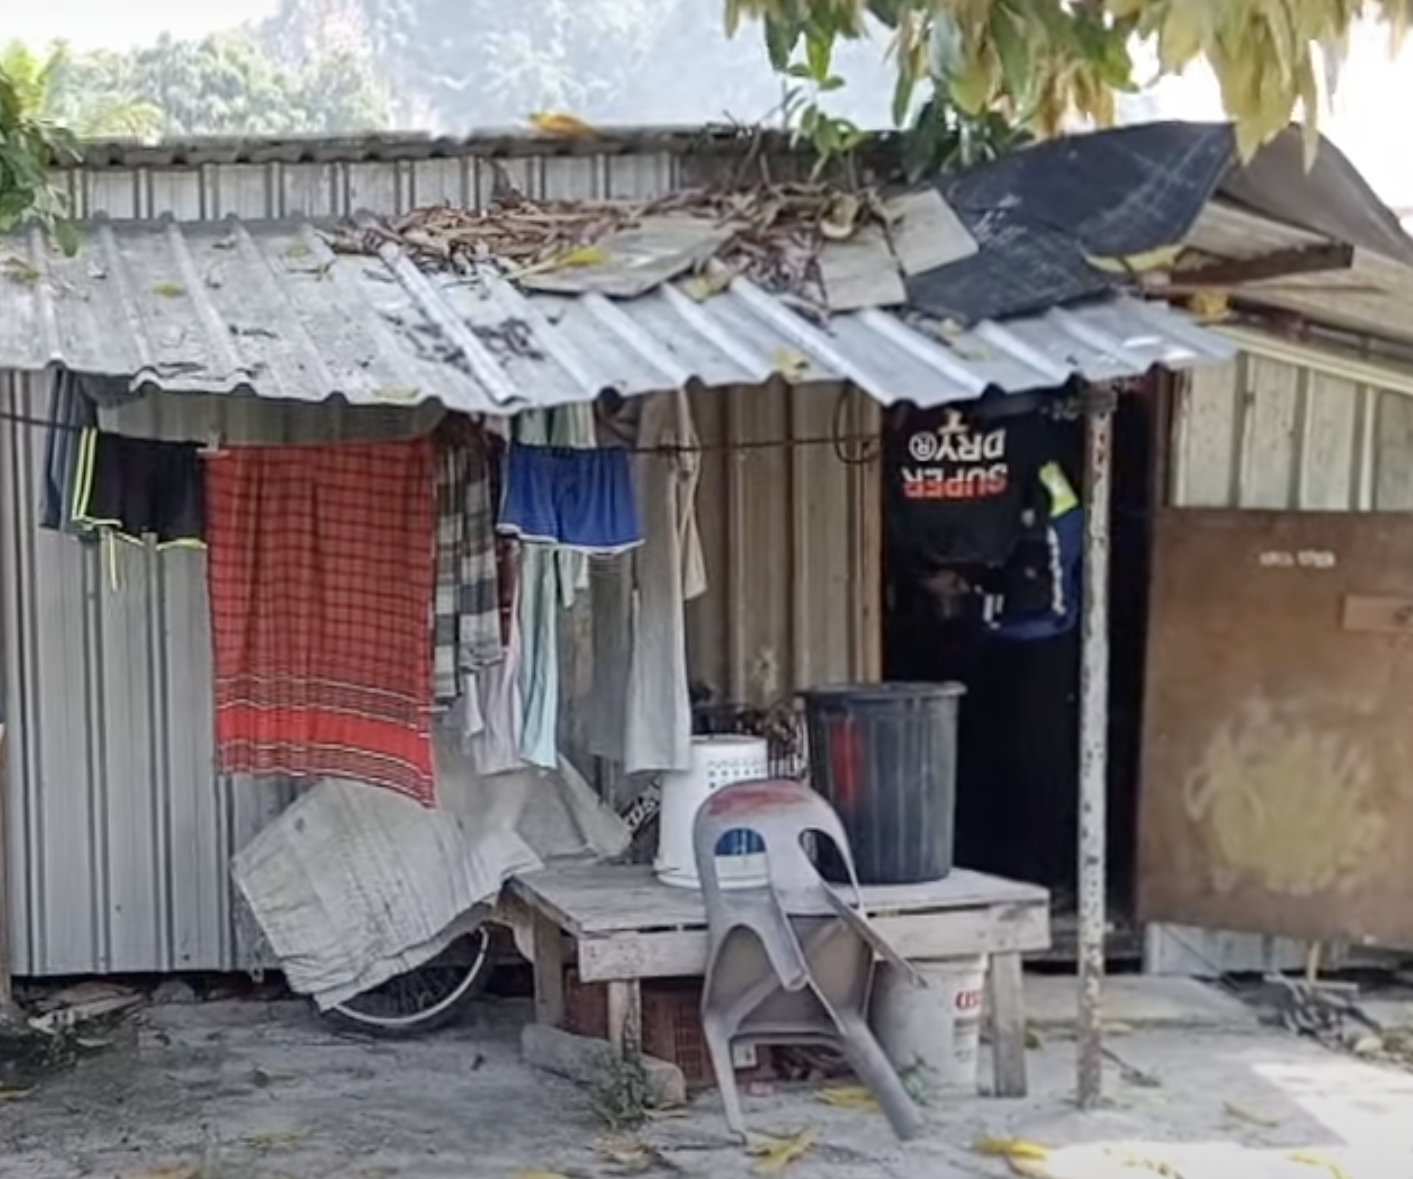 21 factory workers found living in filthy conditions at tile factory in simpang pulai | weirdkaya